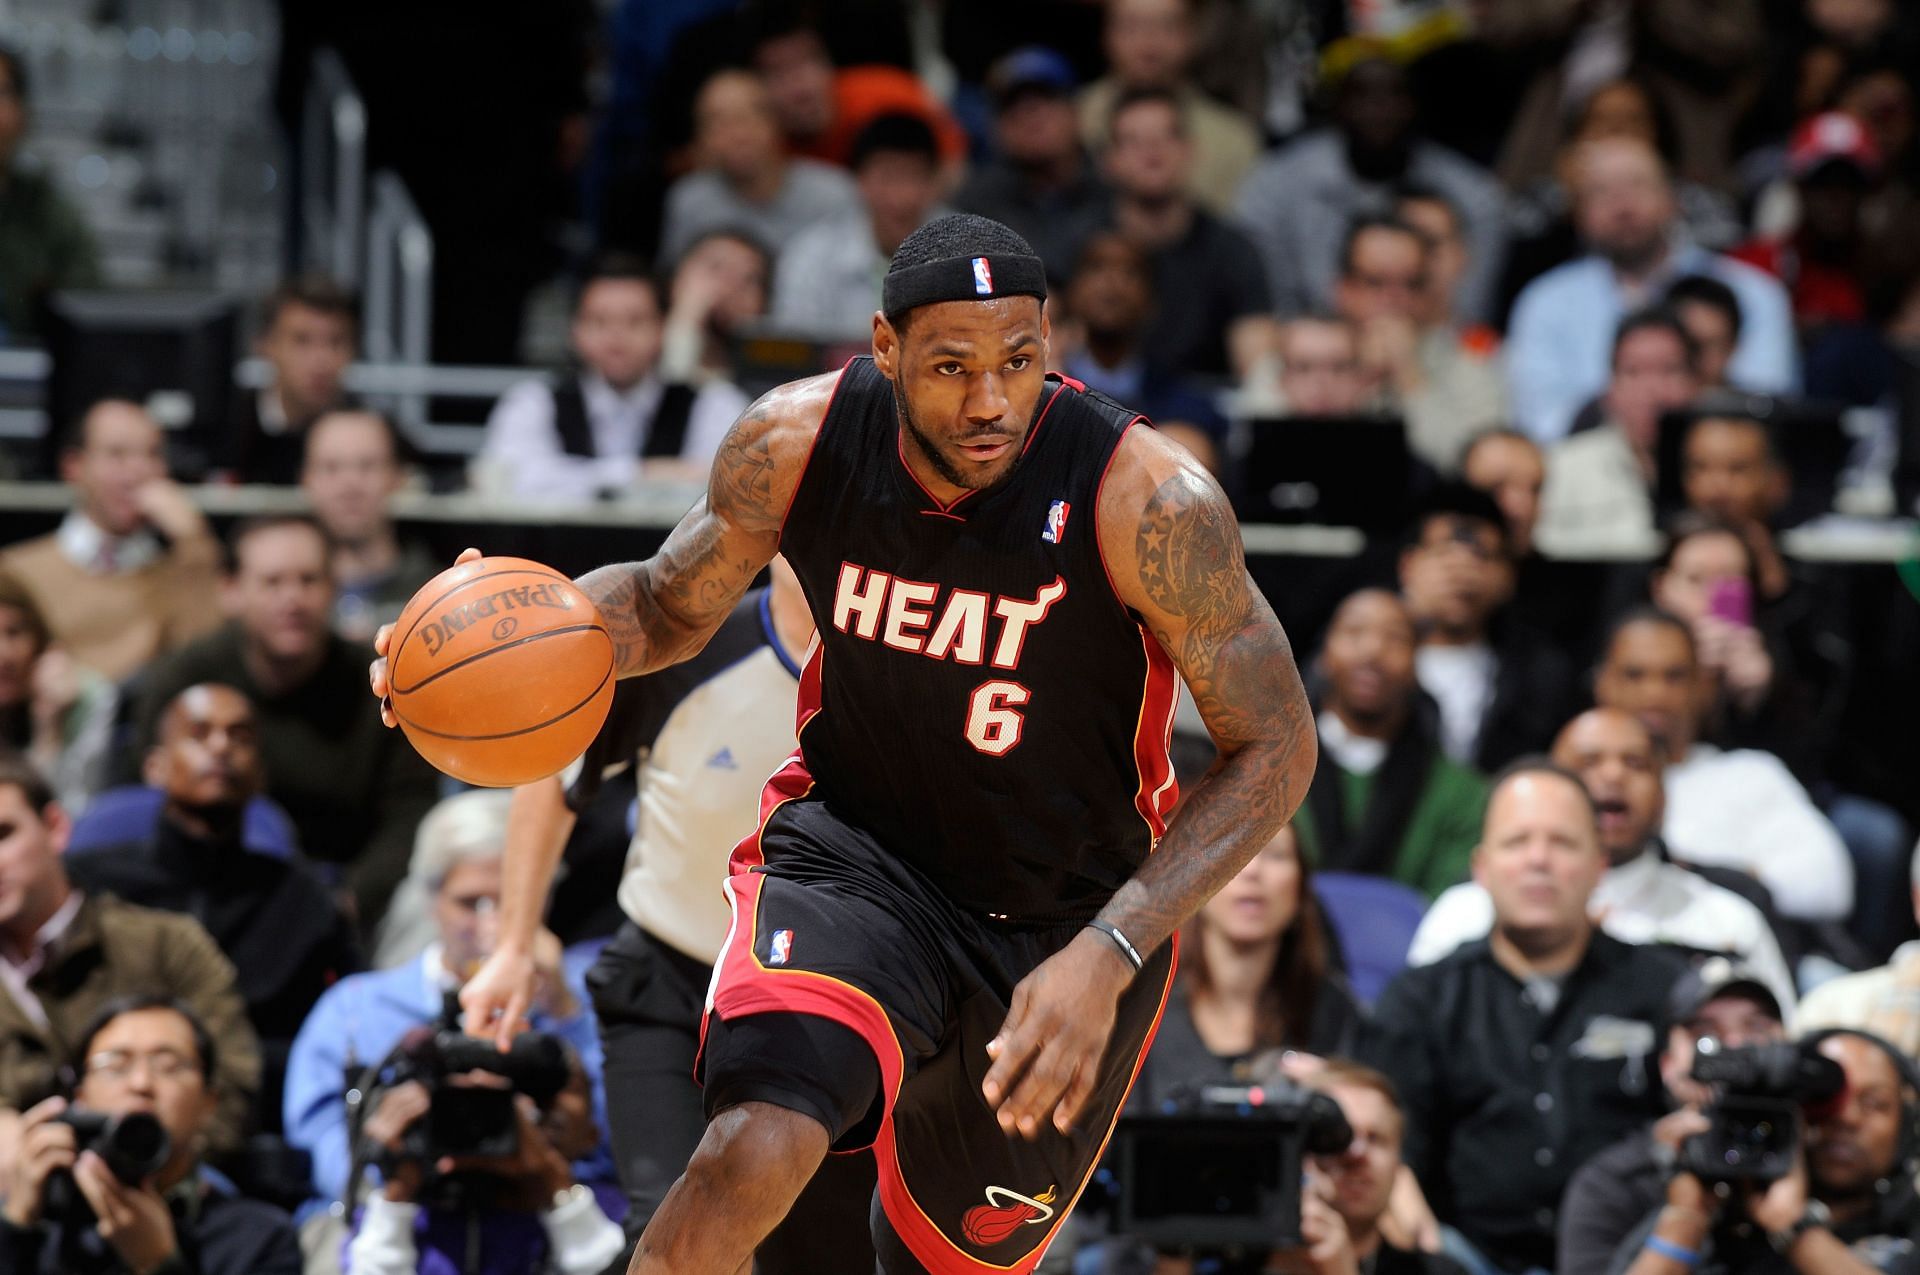 LeBron did not wear an arm sleeve in the first half of his career (Image via Getty Images)